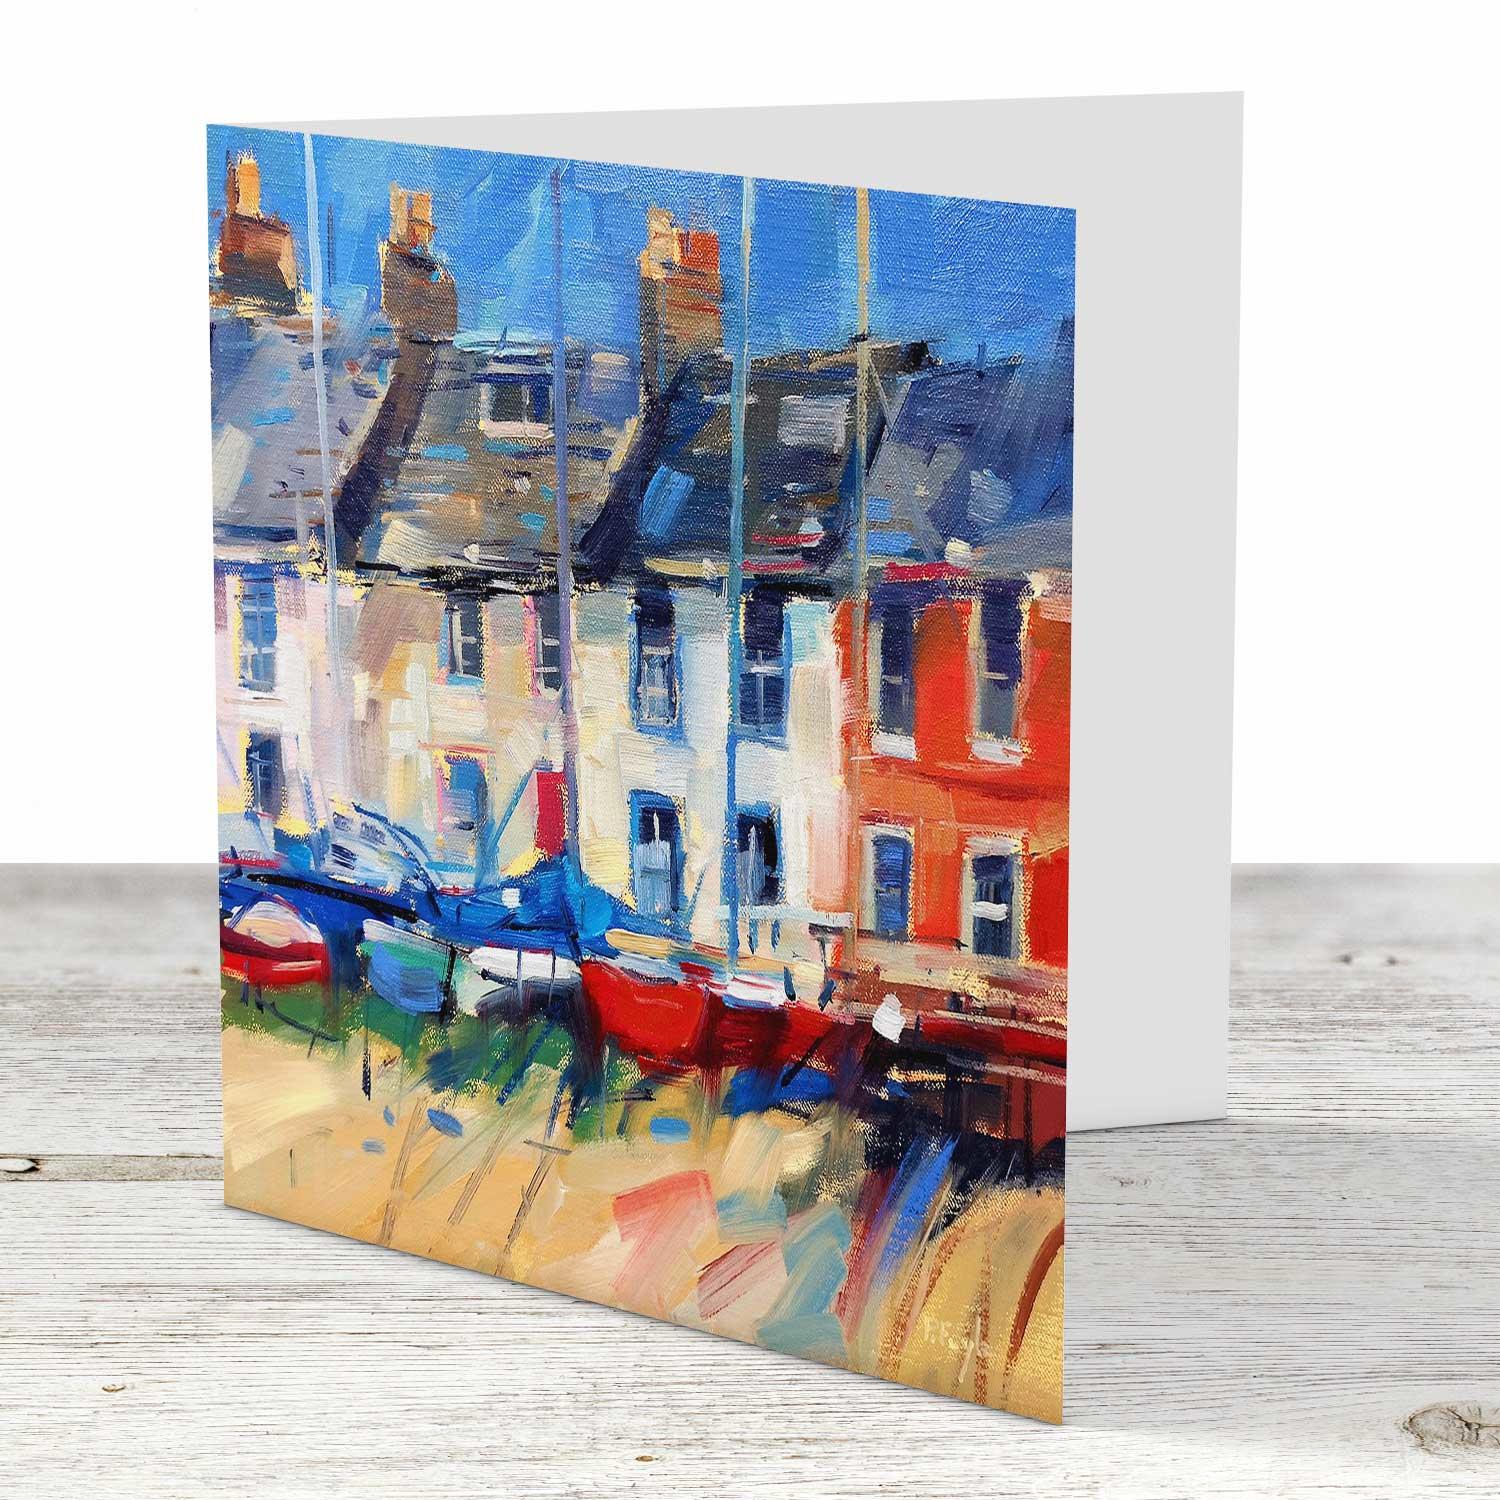 Boatyard, Isle of Whithorn Greeting Card from an original painting by artist Peter Foyle